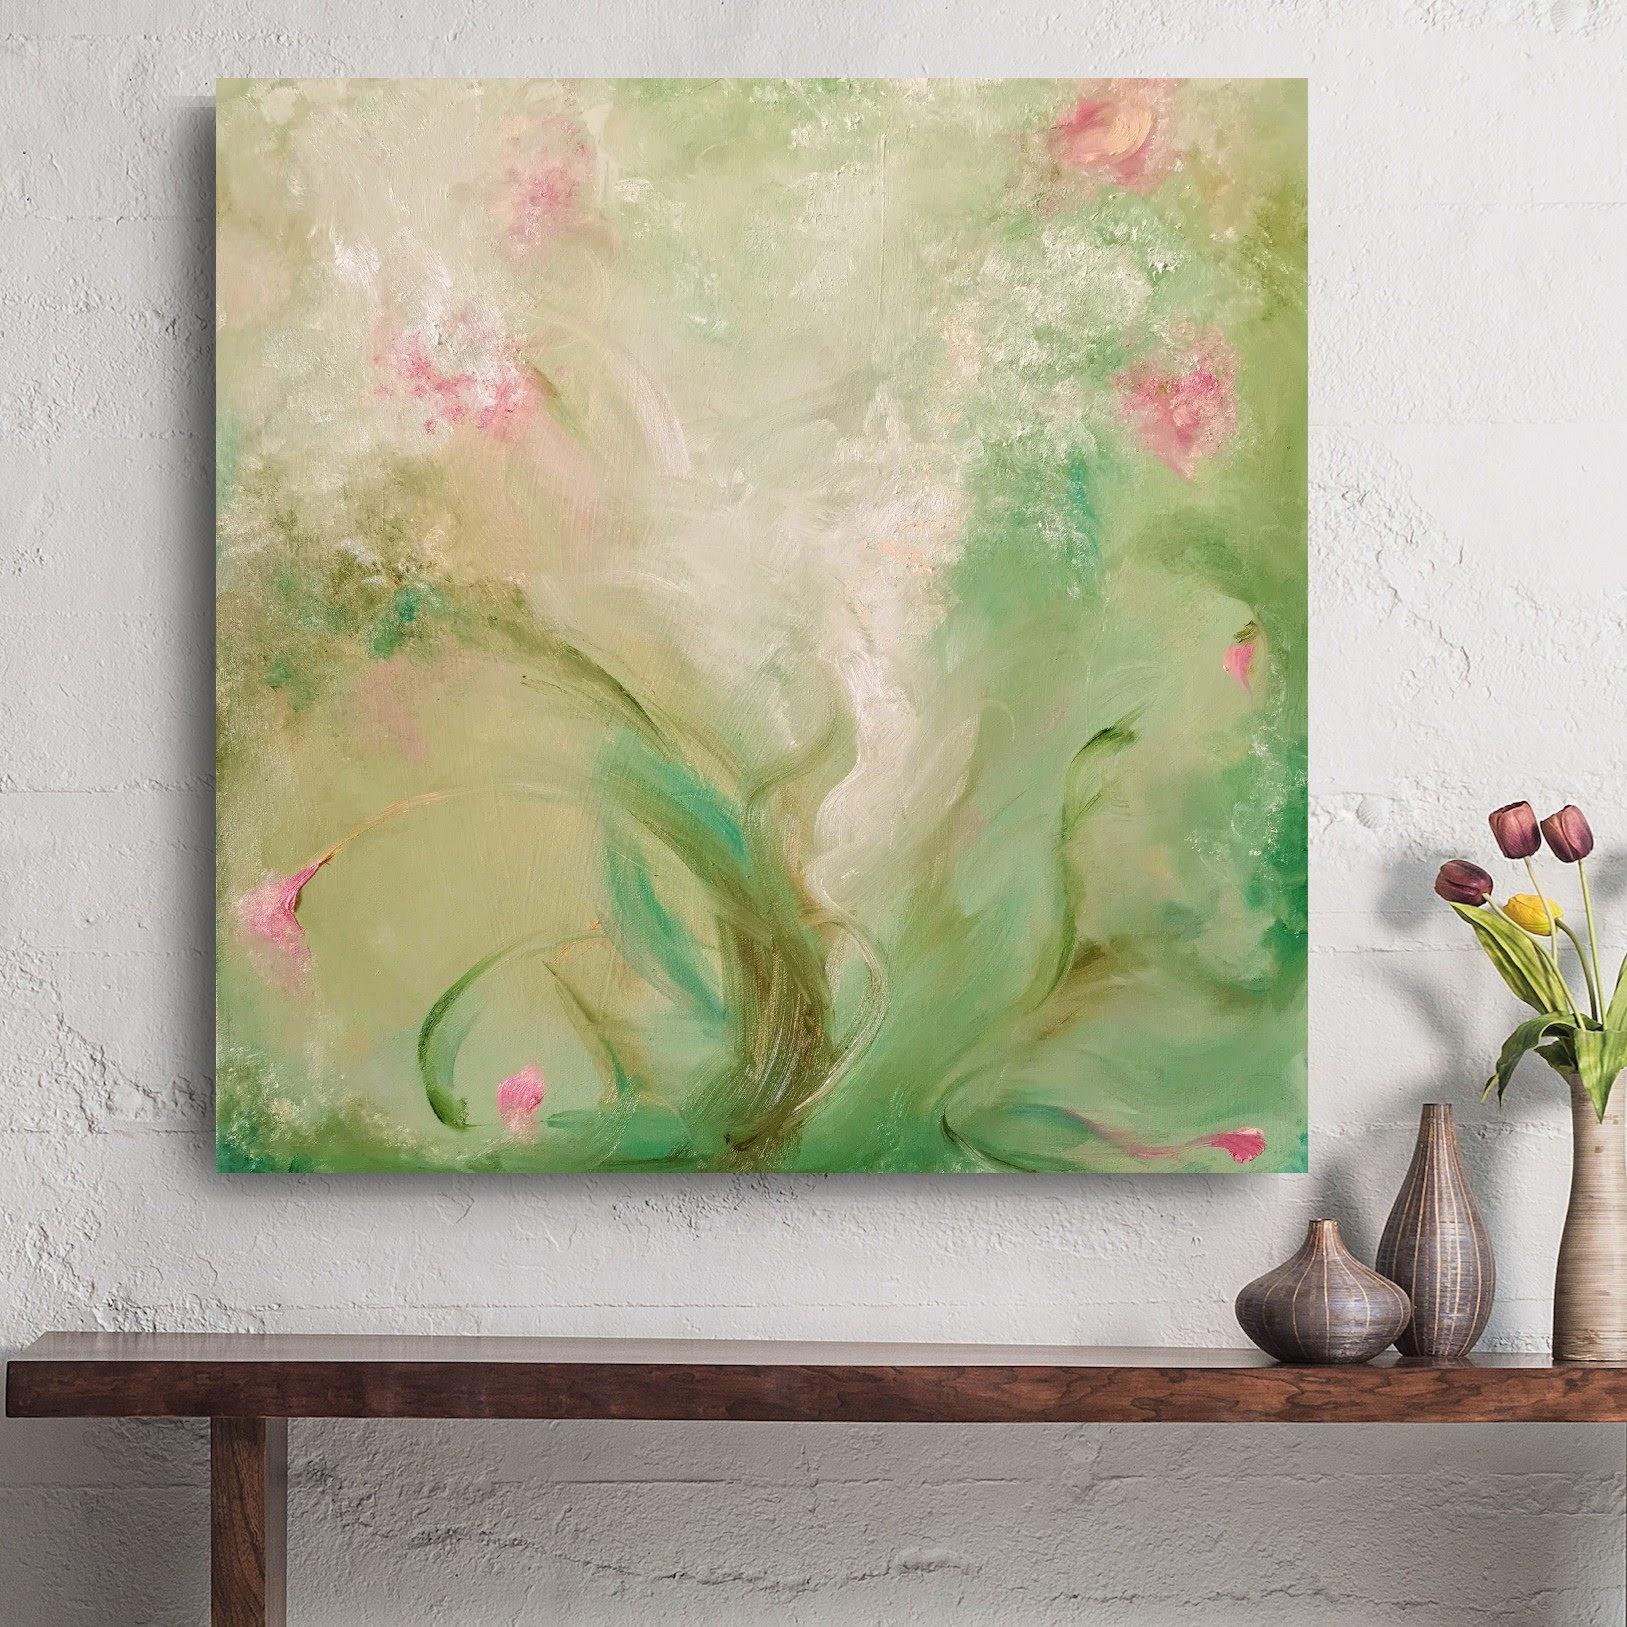 A most verdant spring - Whimsical green and pink abstract painting 4